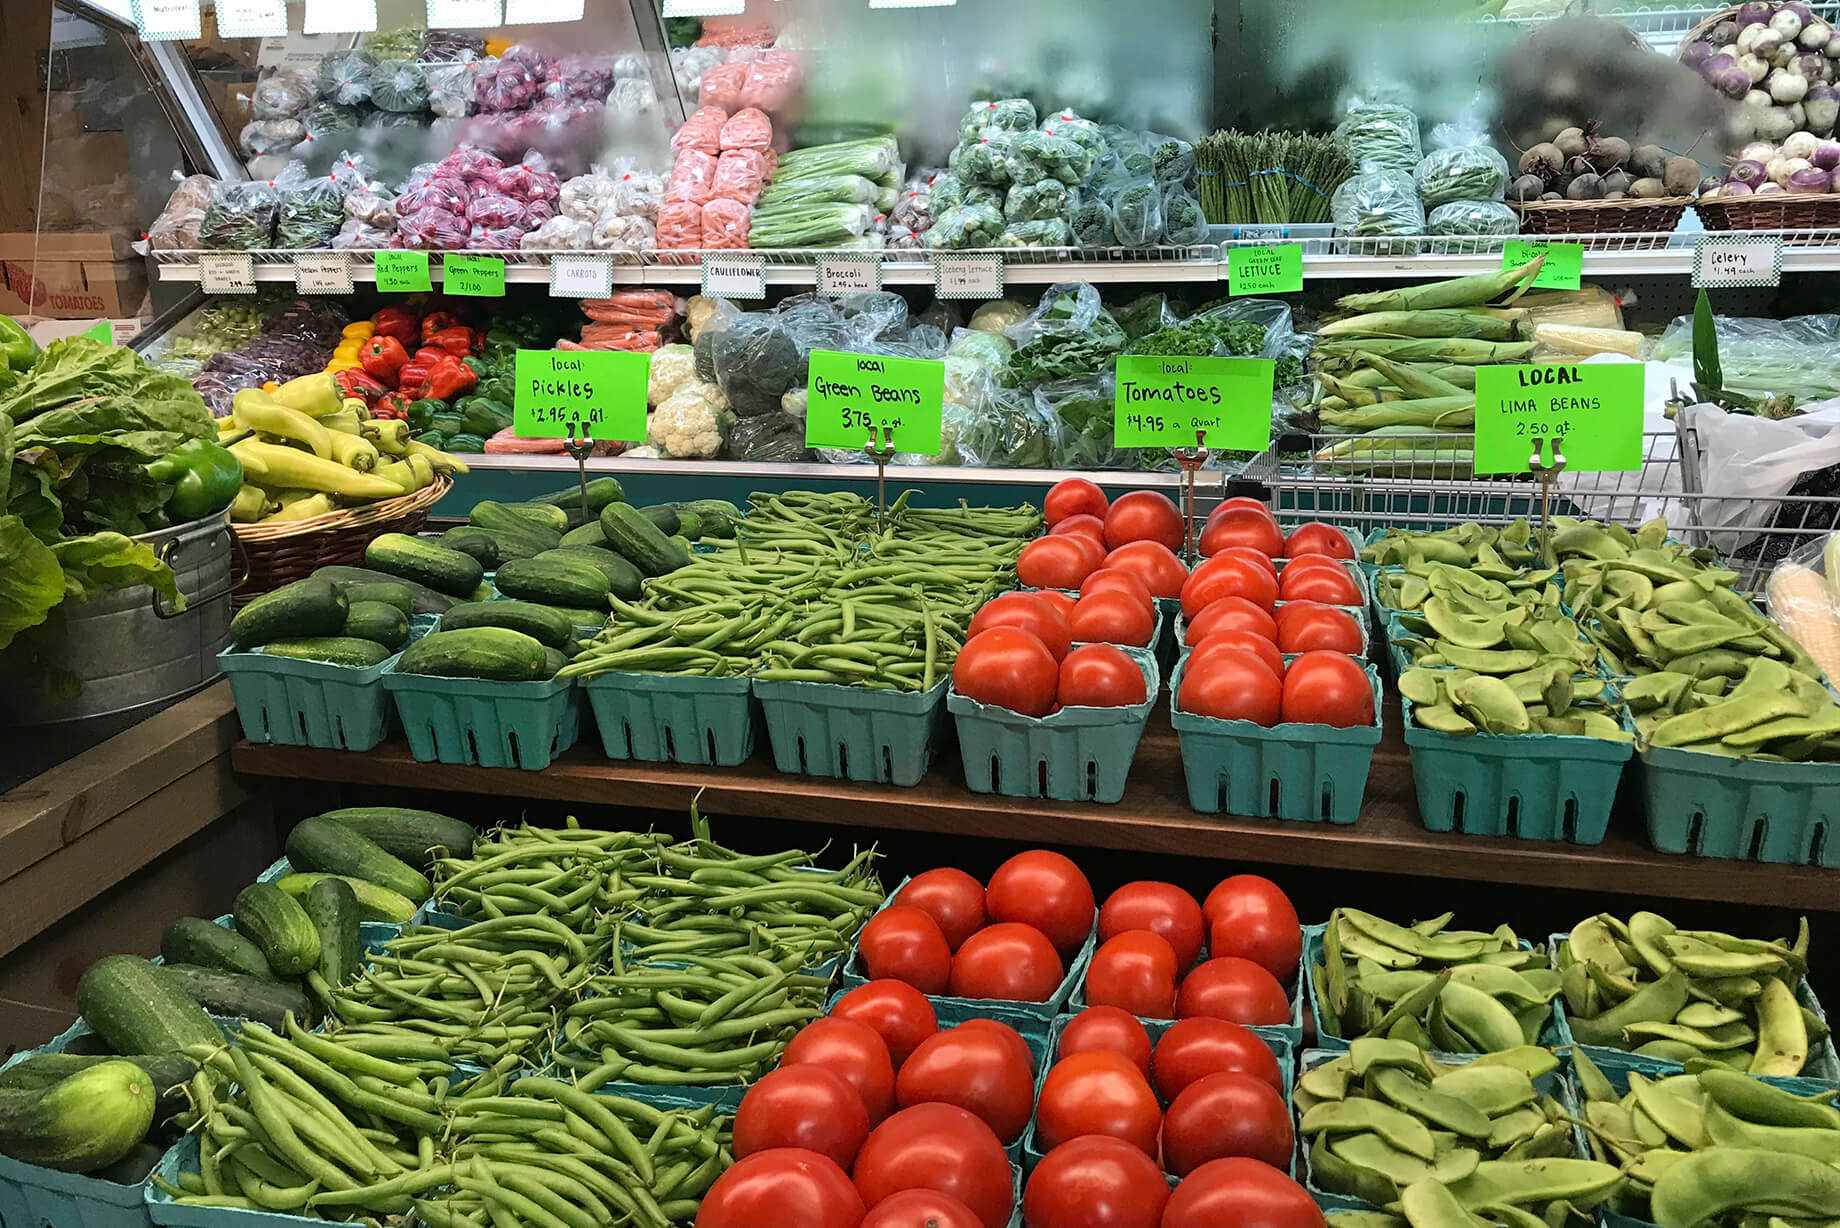 Local vegetables in season, including pickles, green beans, tomatoes, and lima beans at Glick's Produce